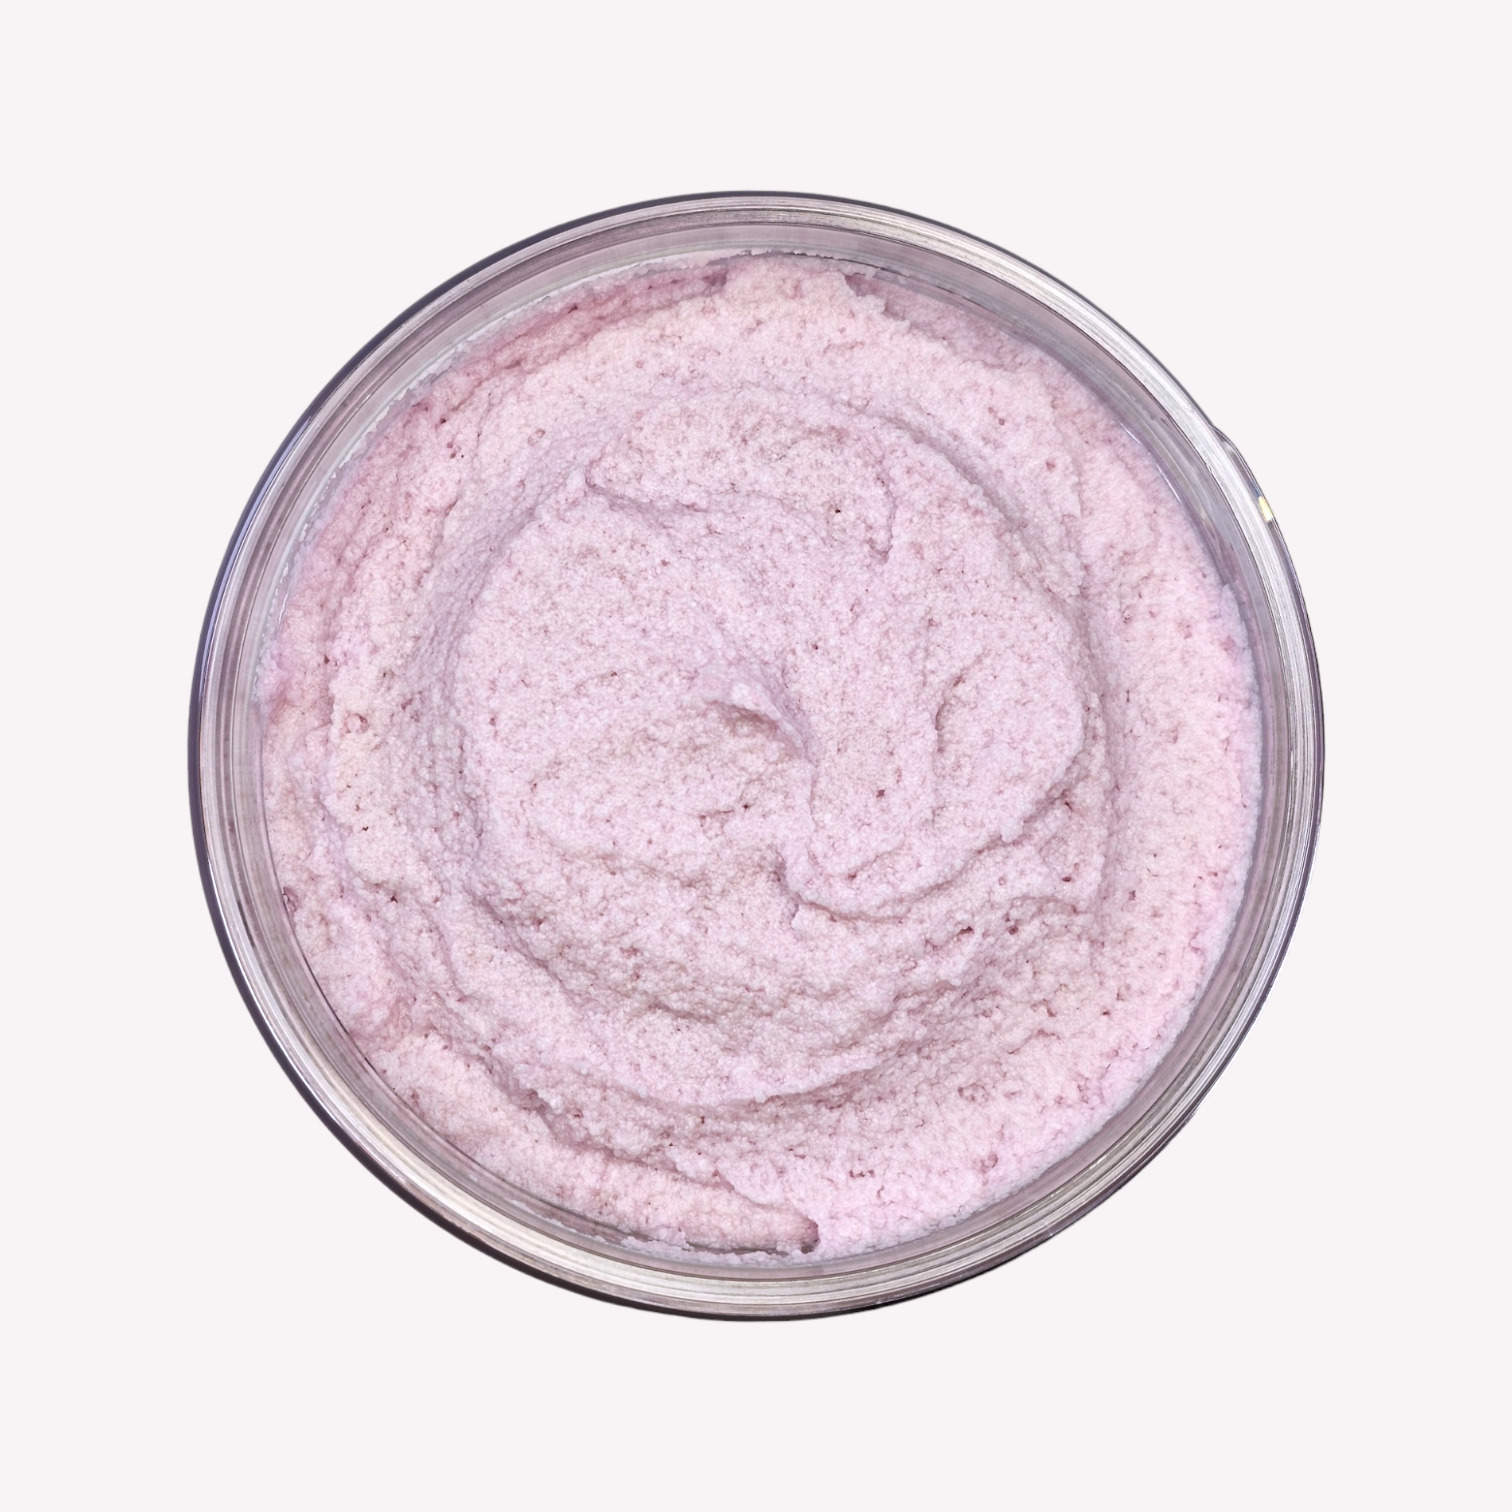 Wildberries & Mimosa Whipped Soap